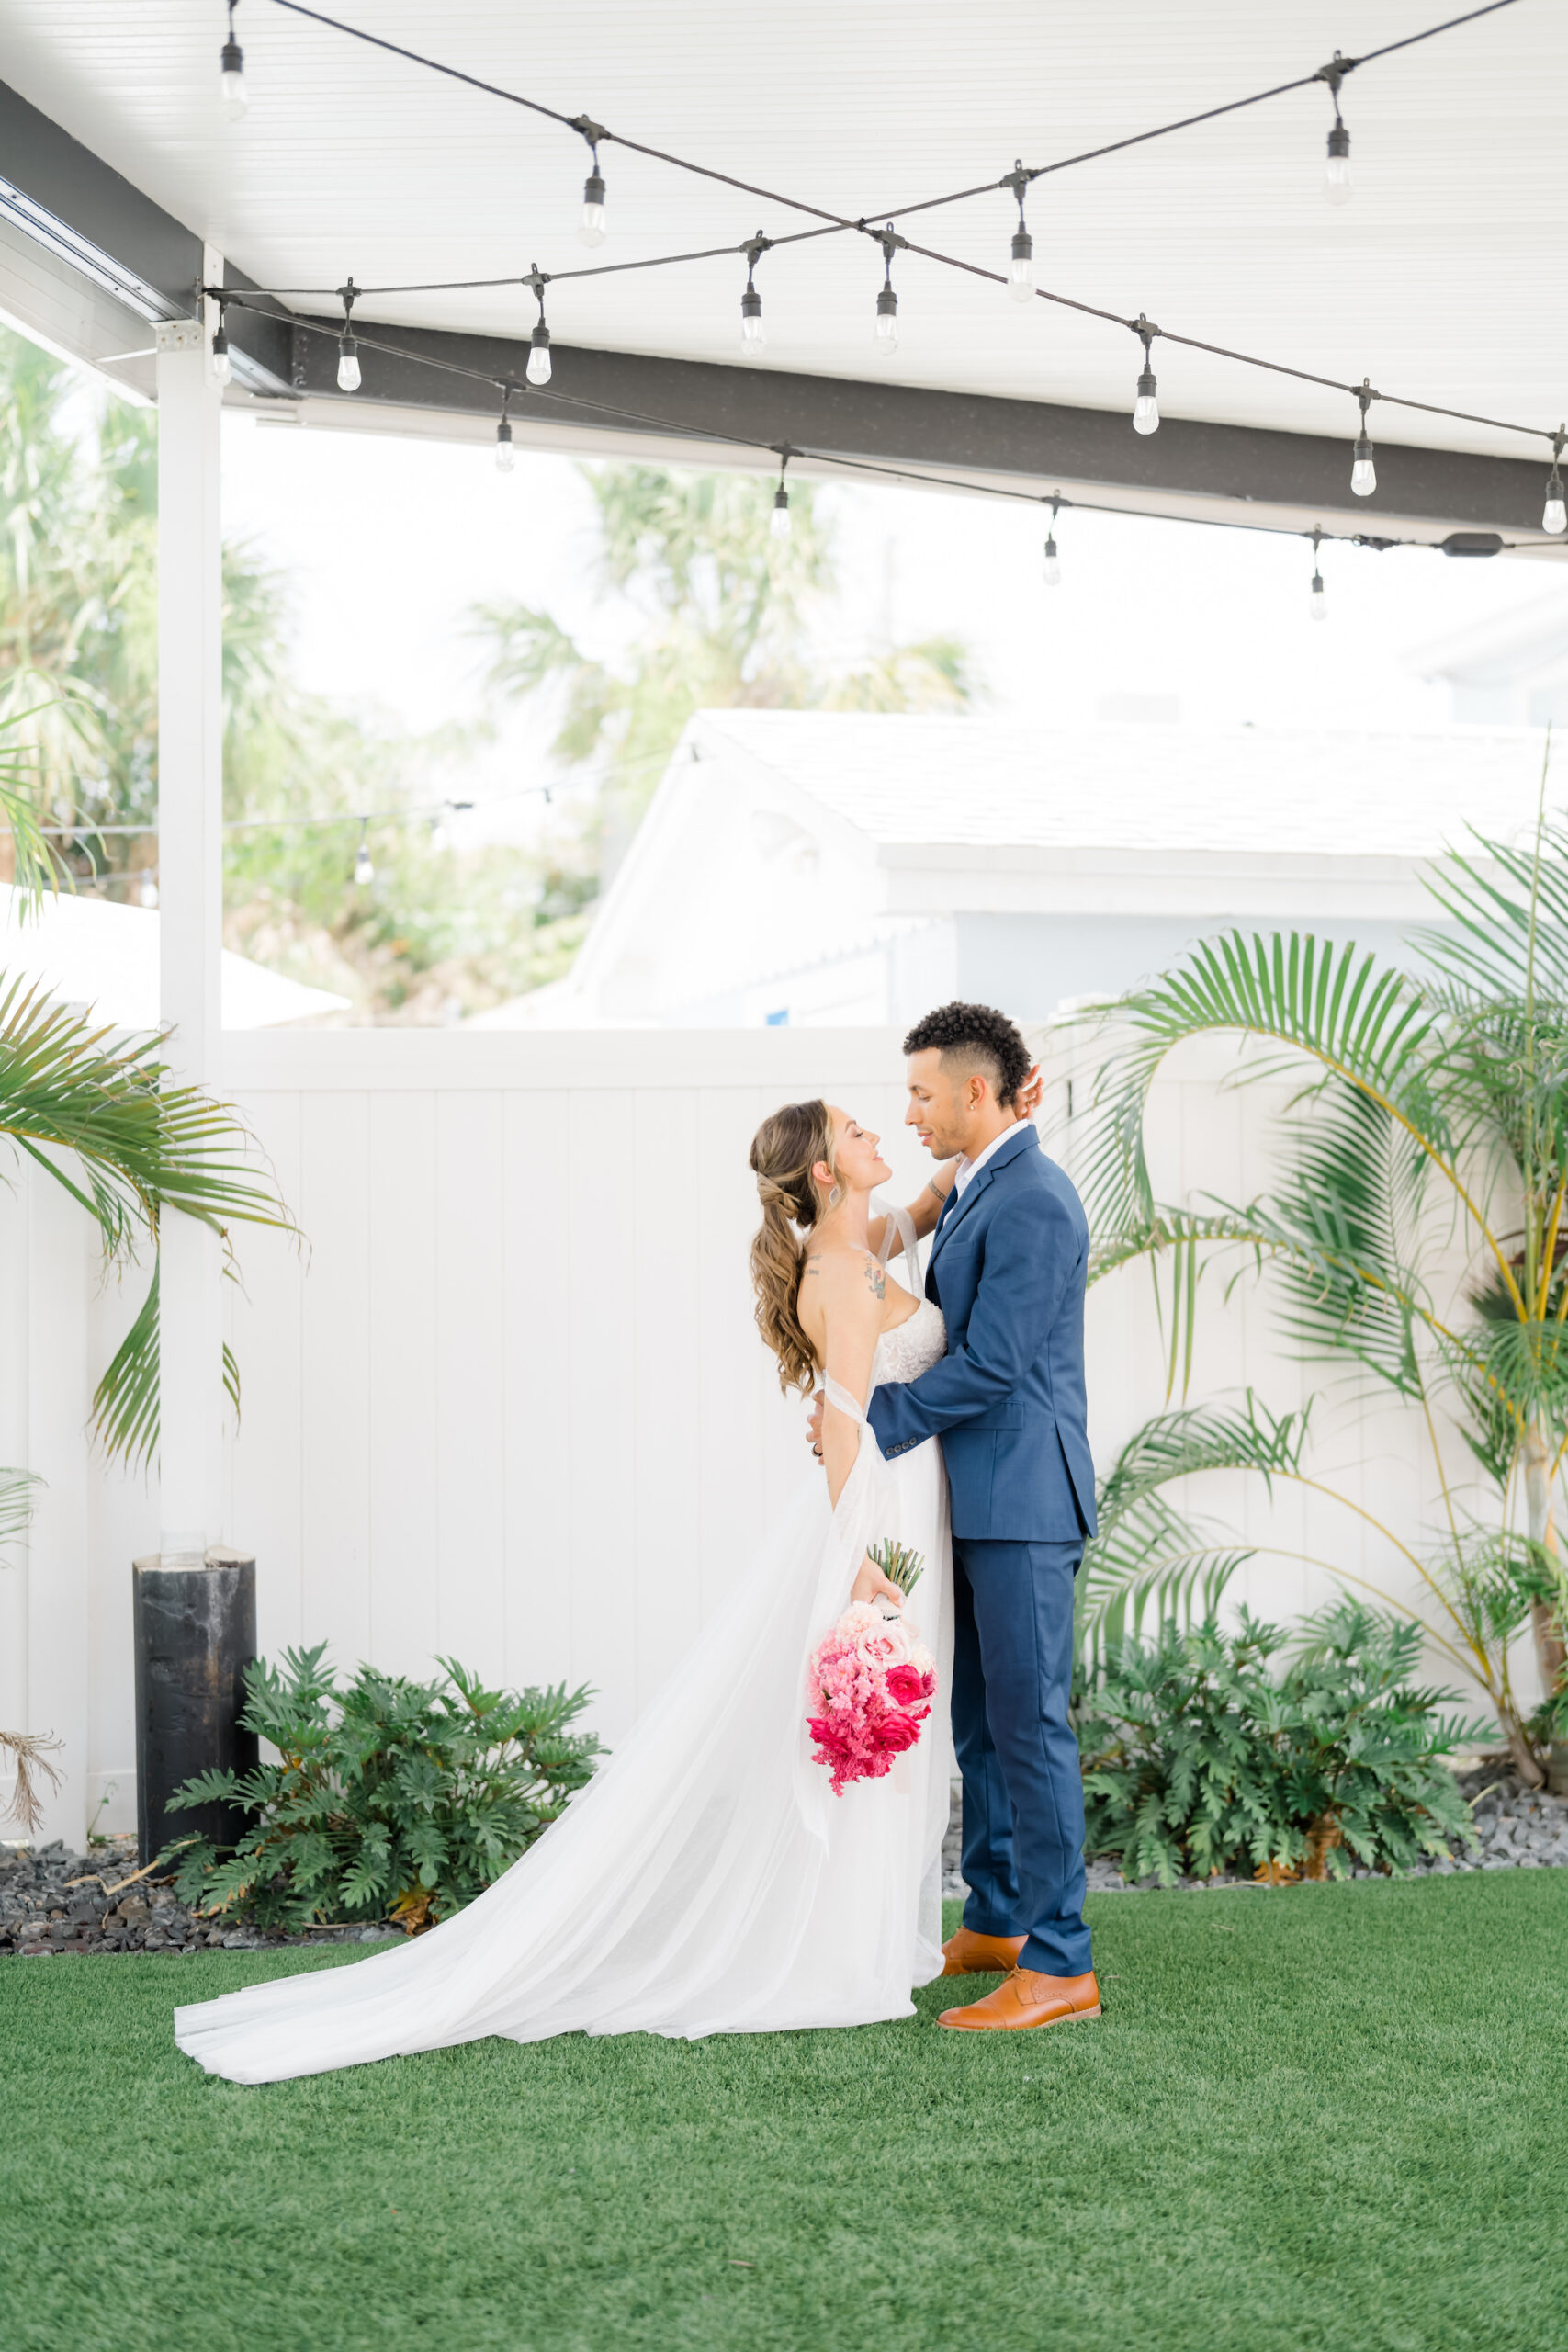 Bride and Groom Wedding Portrait Under Tent with String Lights | Madeira Beach Wedding Venue The West Events